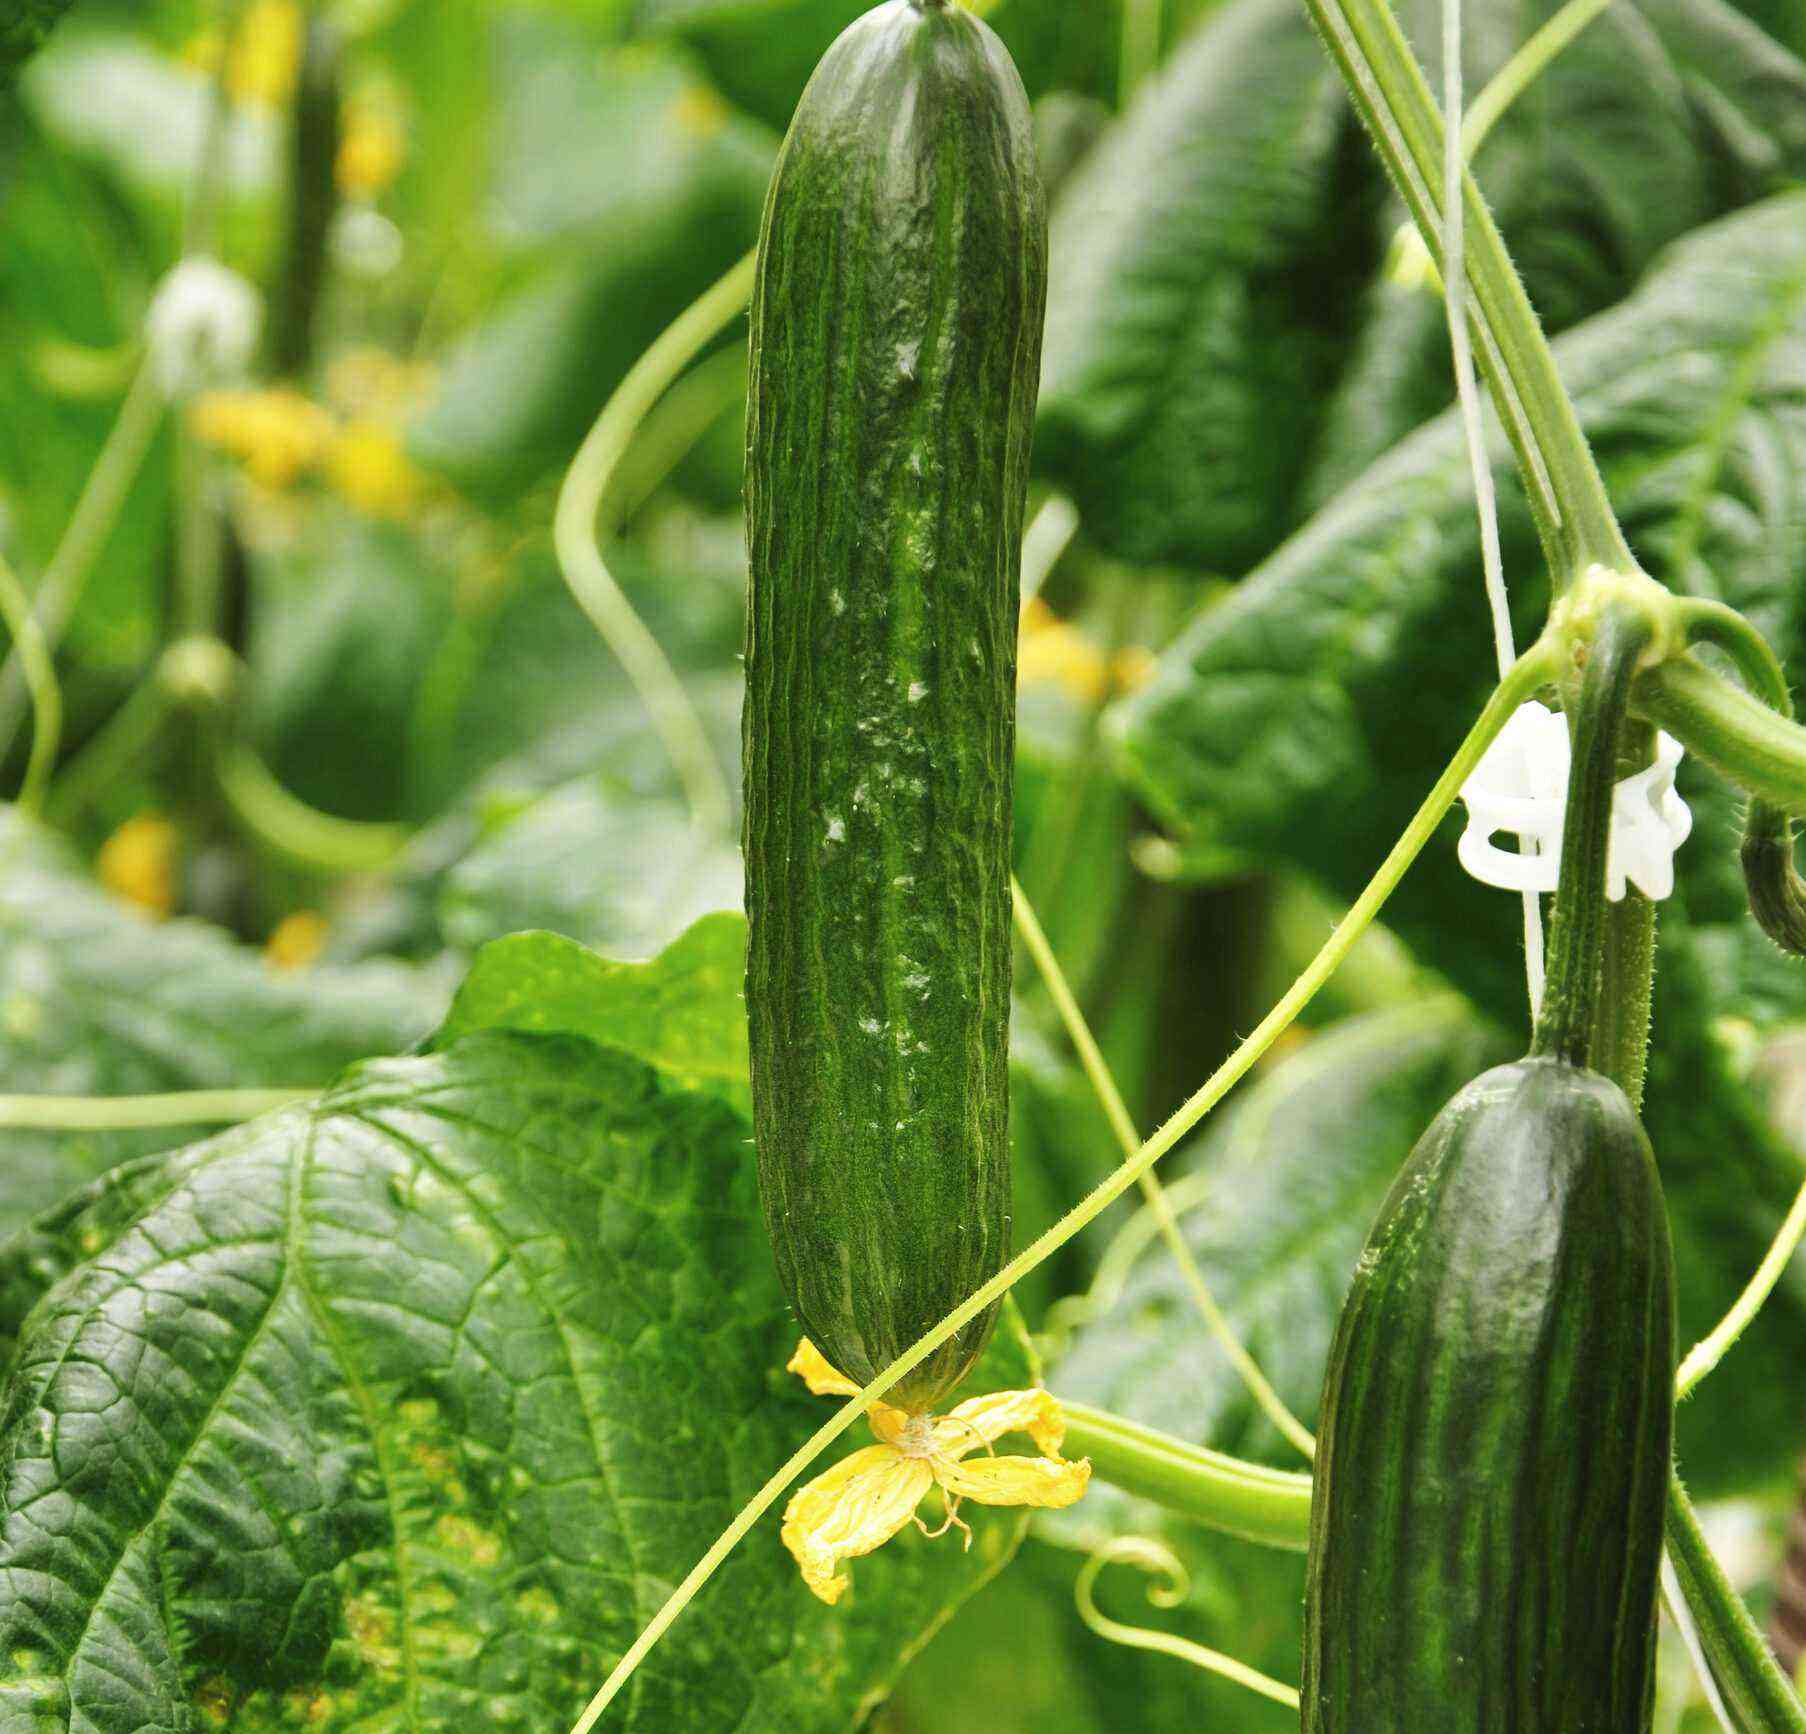 Planting cucumbers in a greenhouse